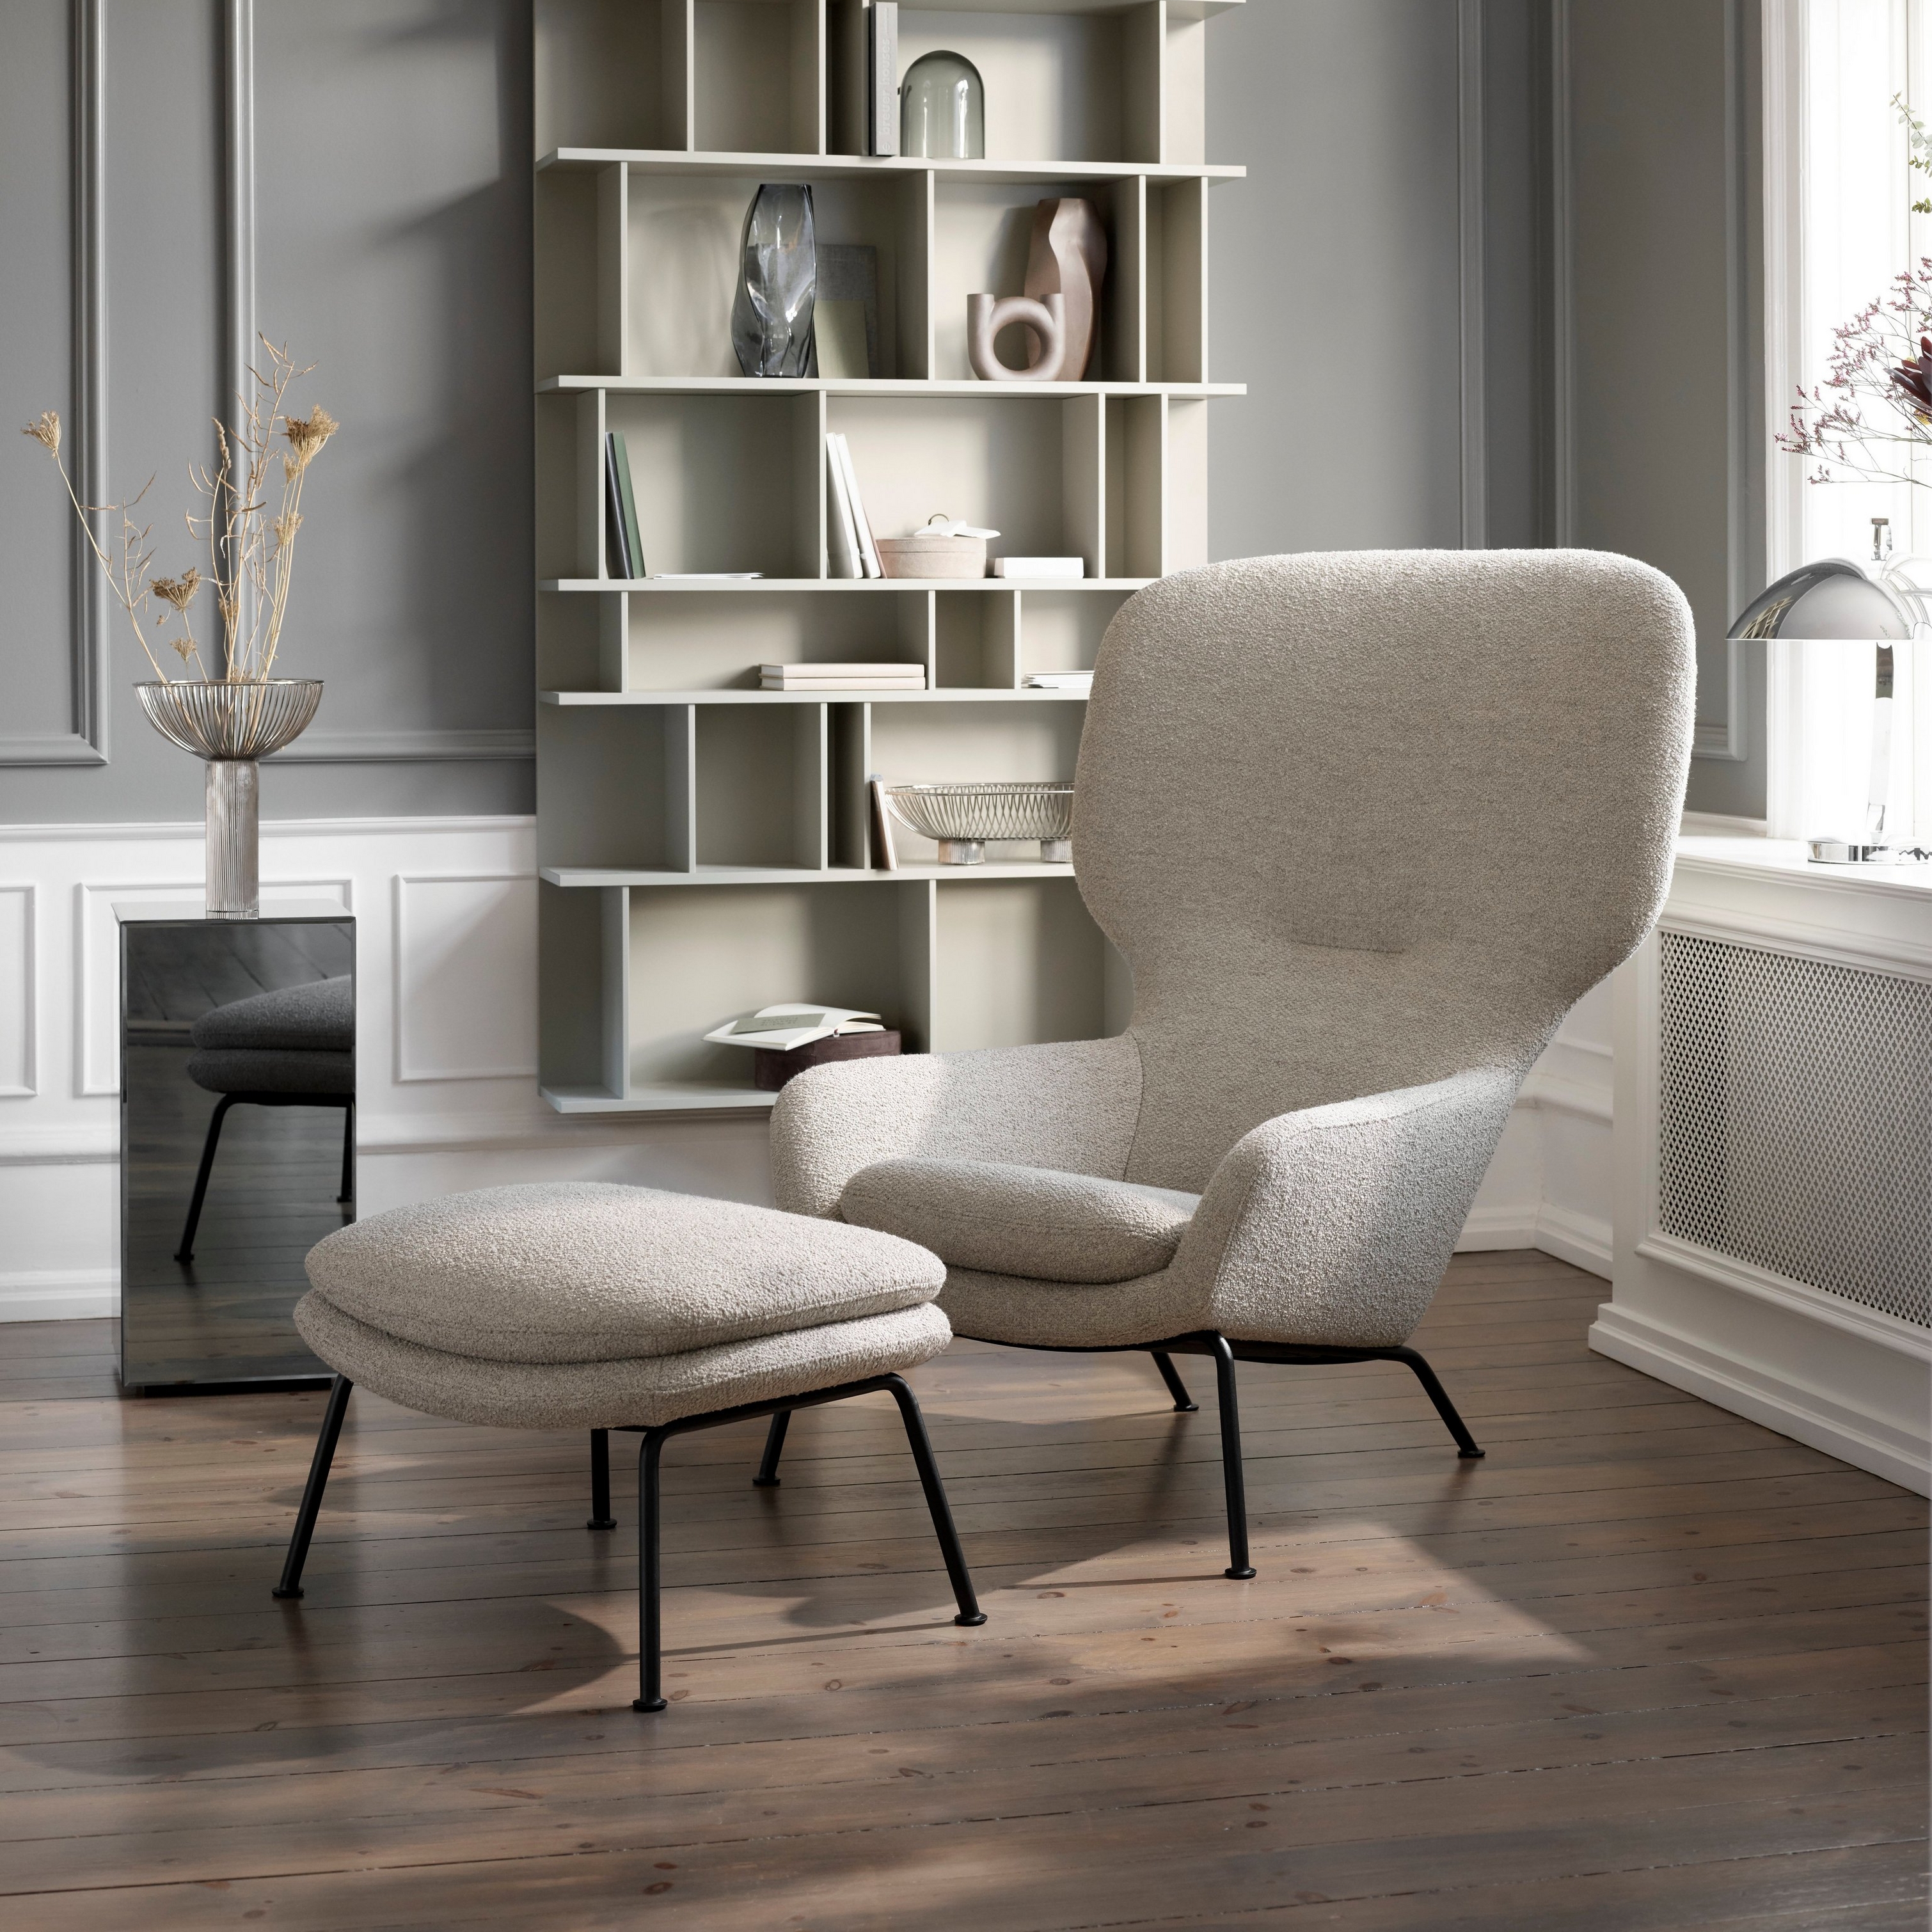 Lounge chair and ottoman with bookshelf and decor, in a classic room with dark floors.